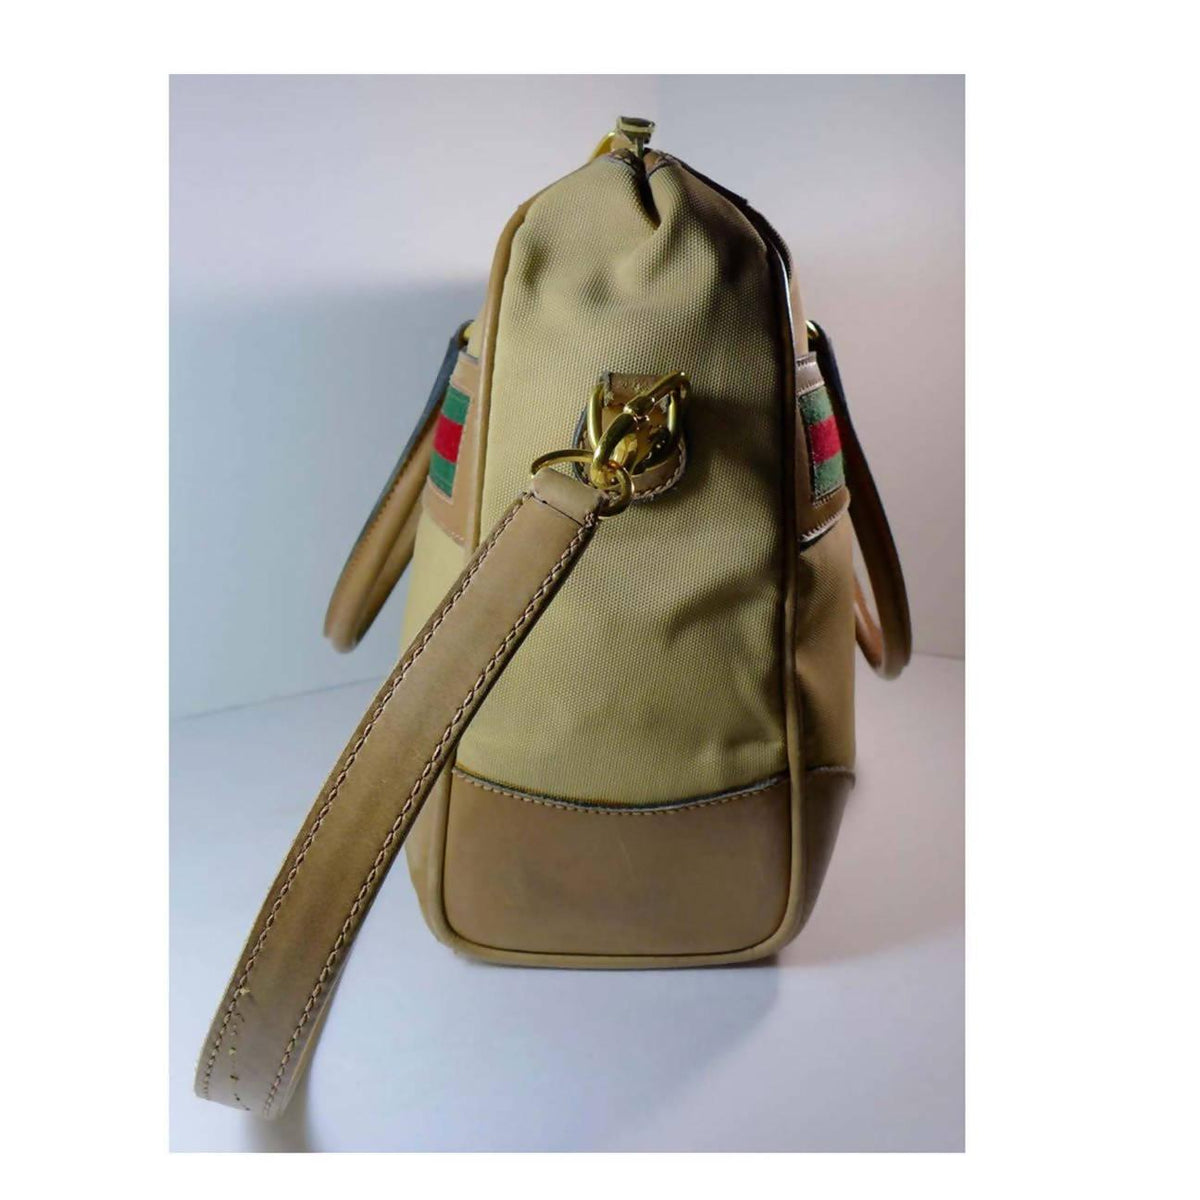 Pre-owned GUCCI Tan Leather and Canvas Shoulder Bag - theREMODA